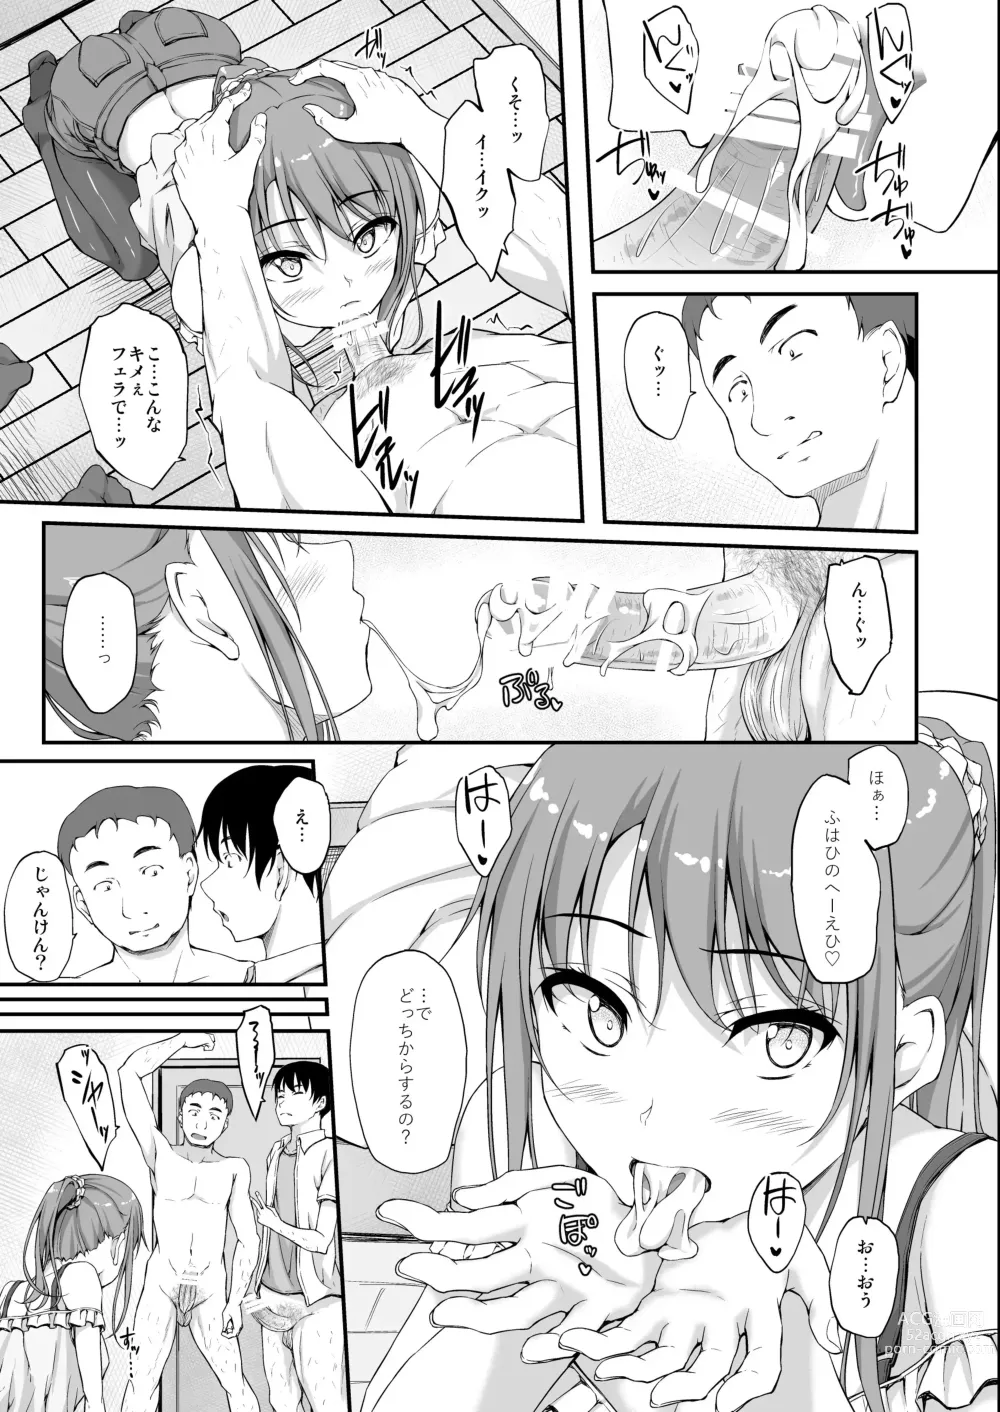 Page 17 of doujinshi Re:Temptation 5